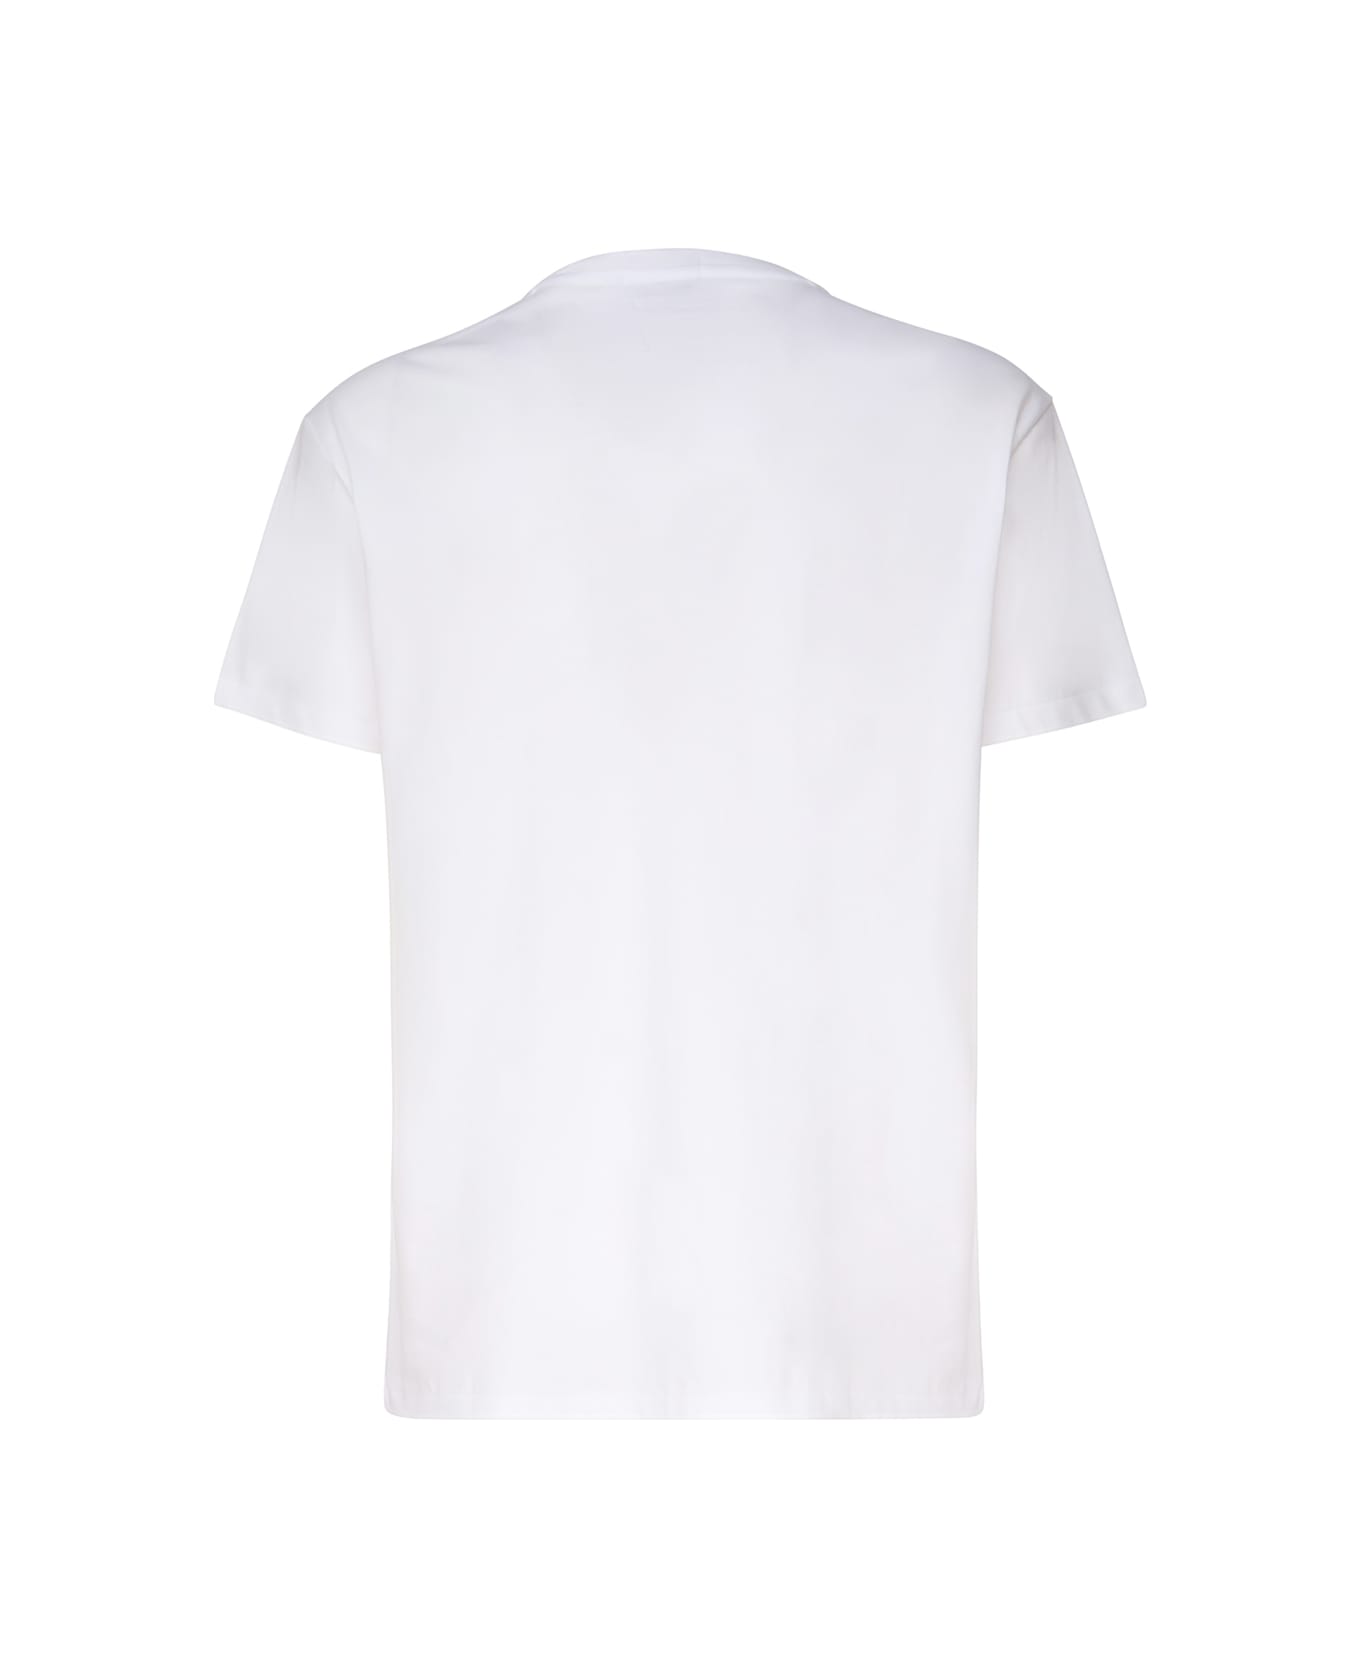 Polo Ralph Lauren T-shirt With Embroidery - White